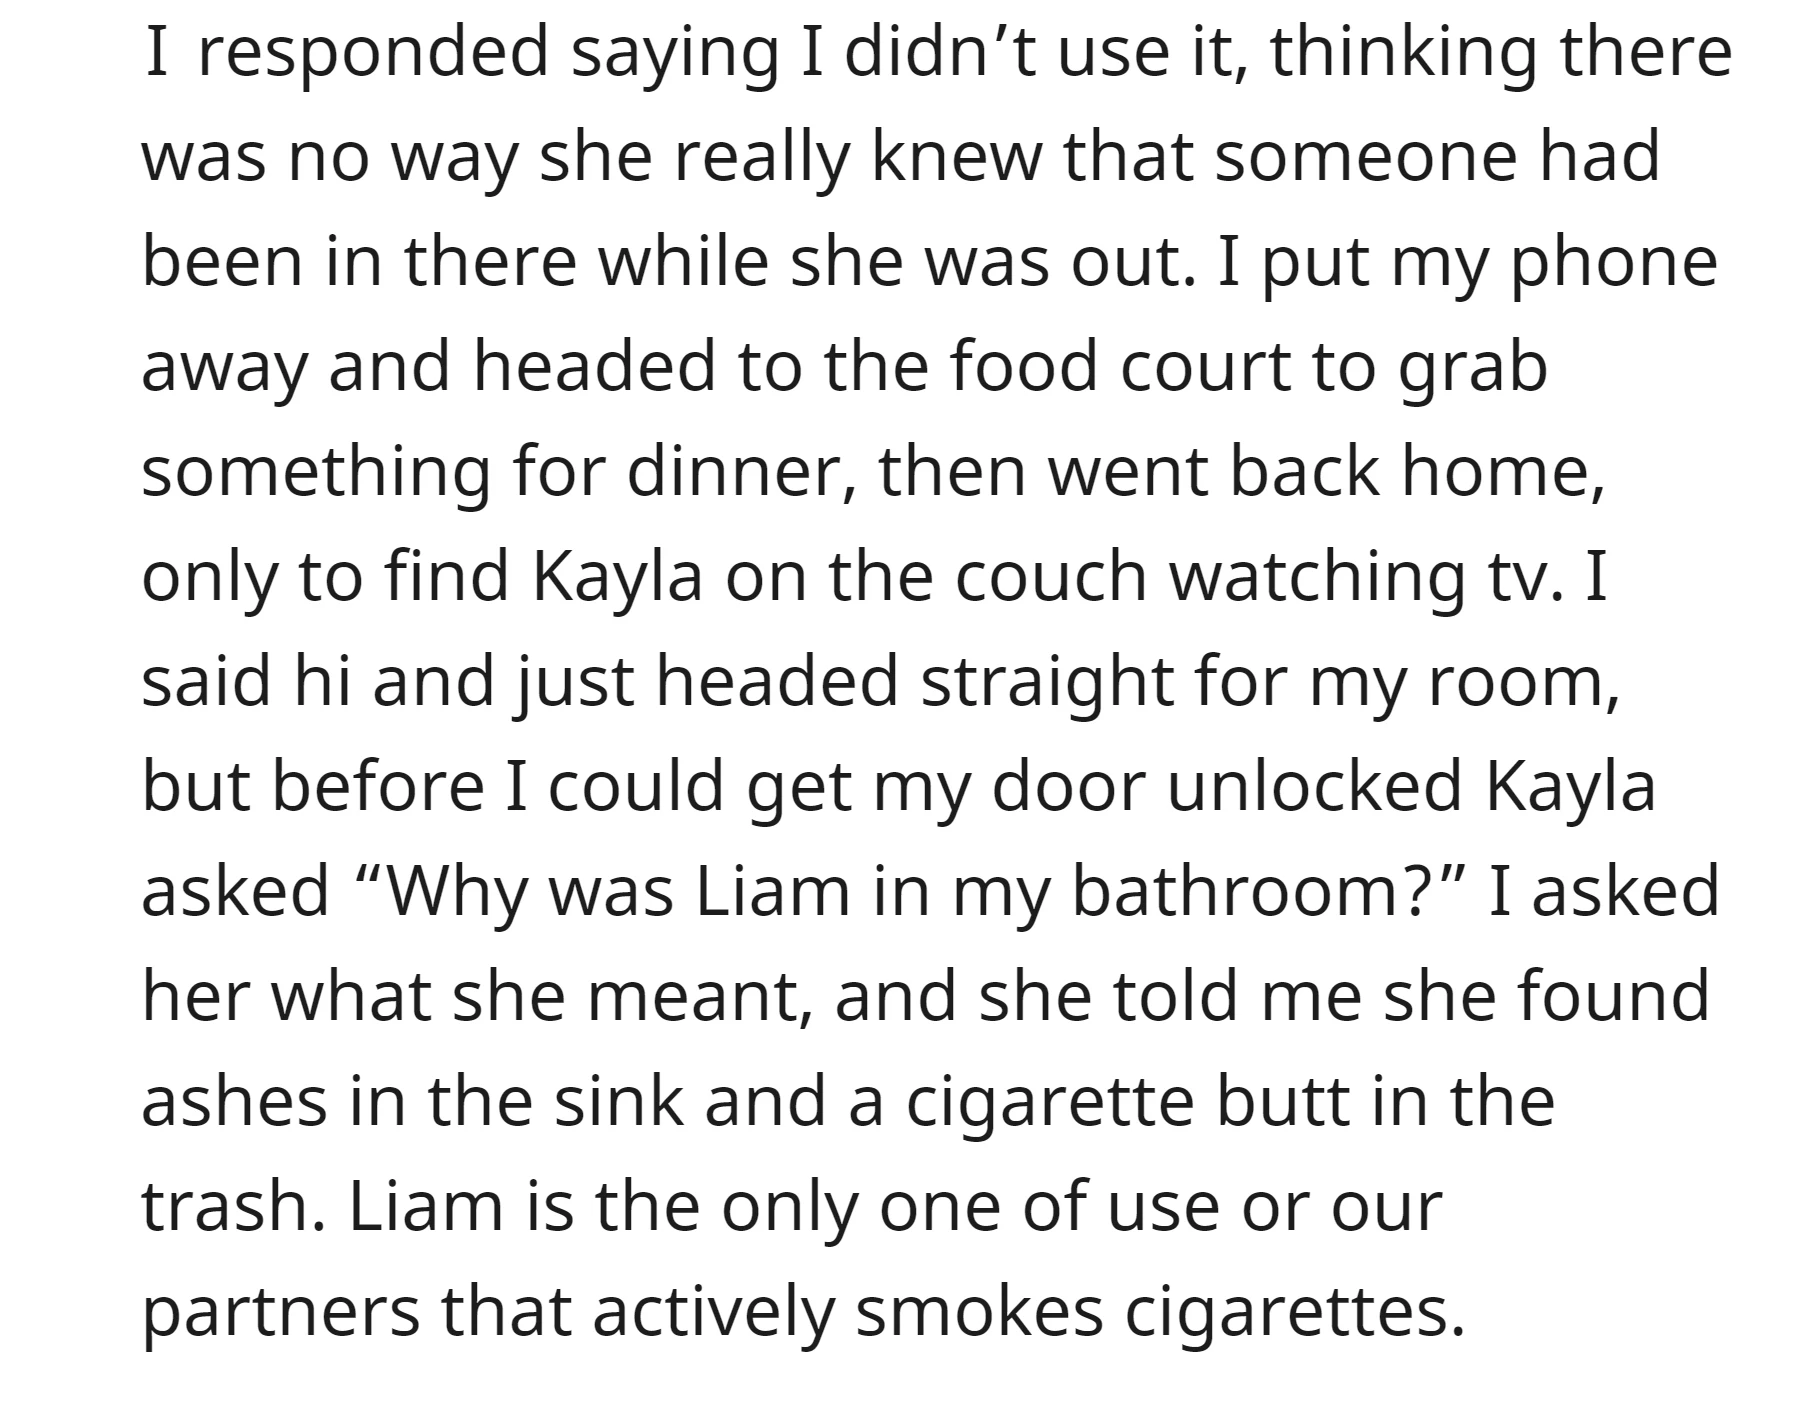 OP faced questioning about her boyfriend using her roommate's bathroom